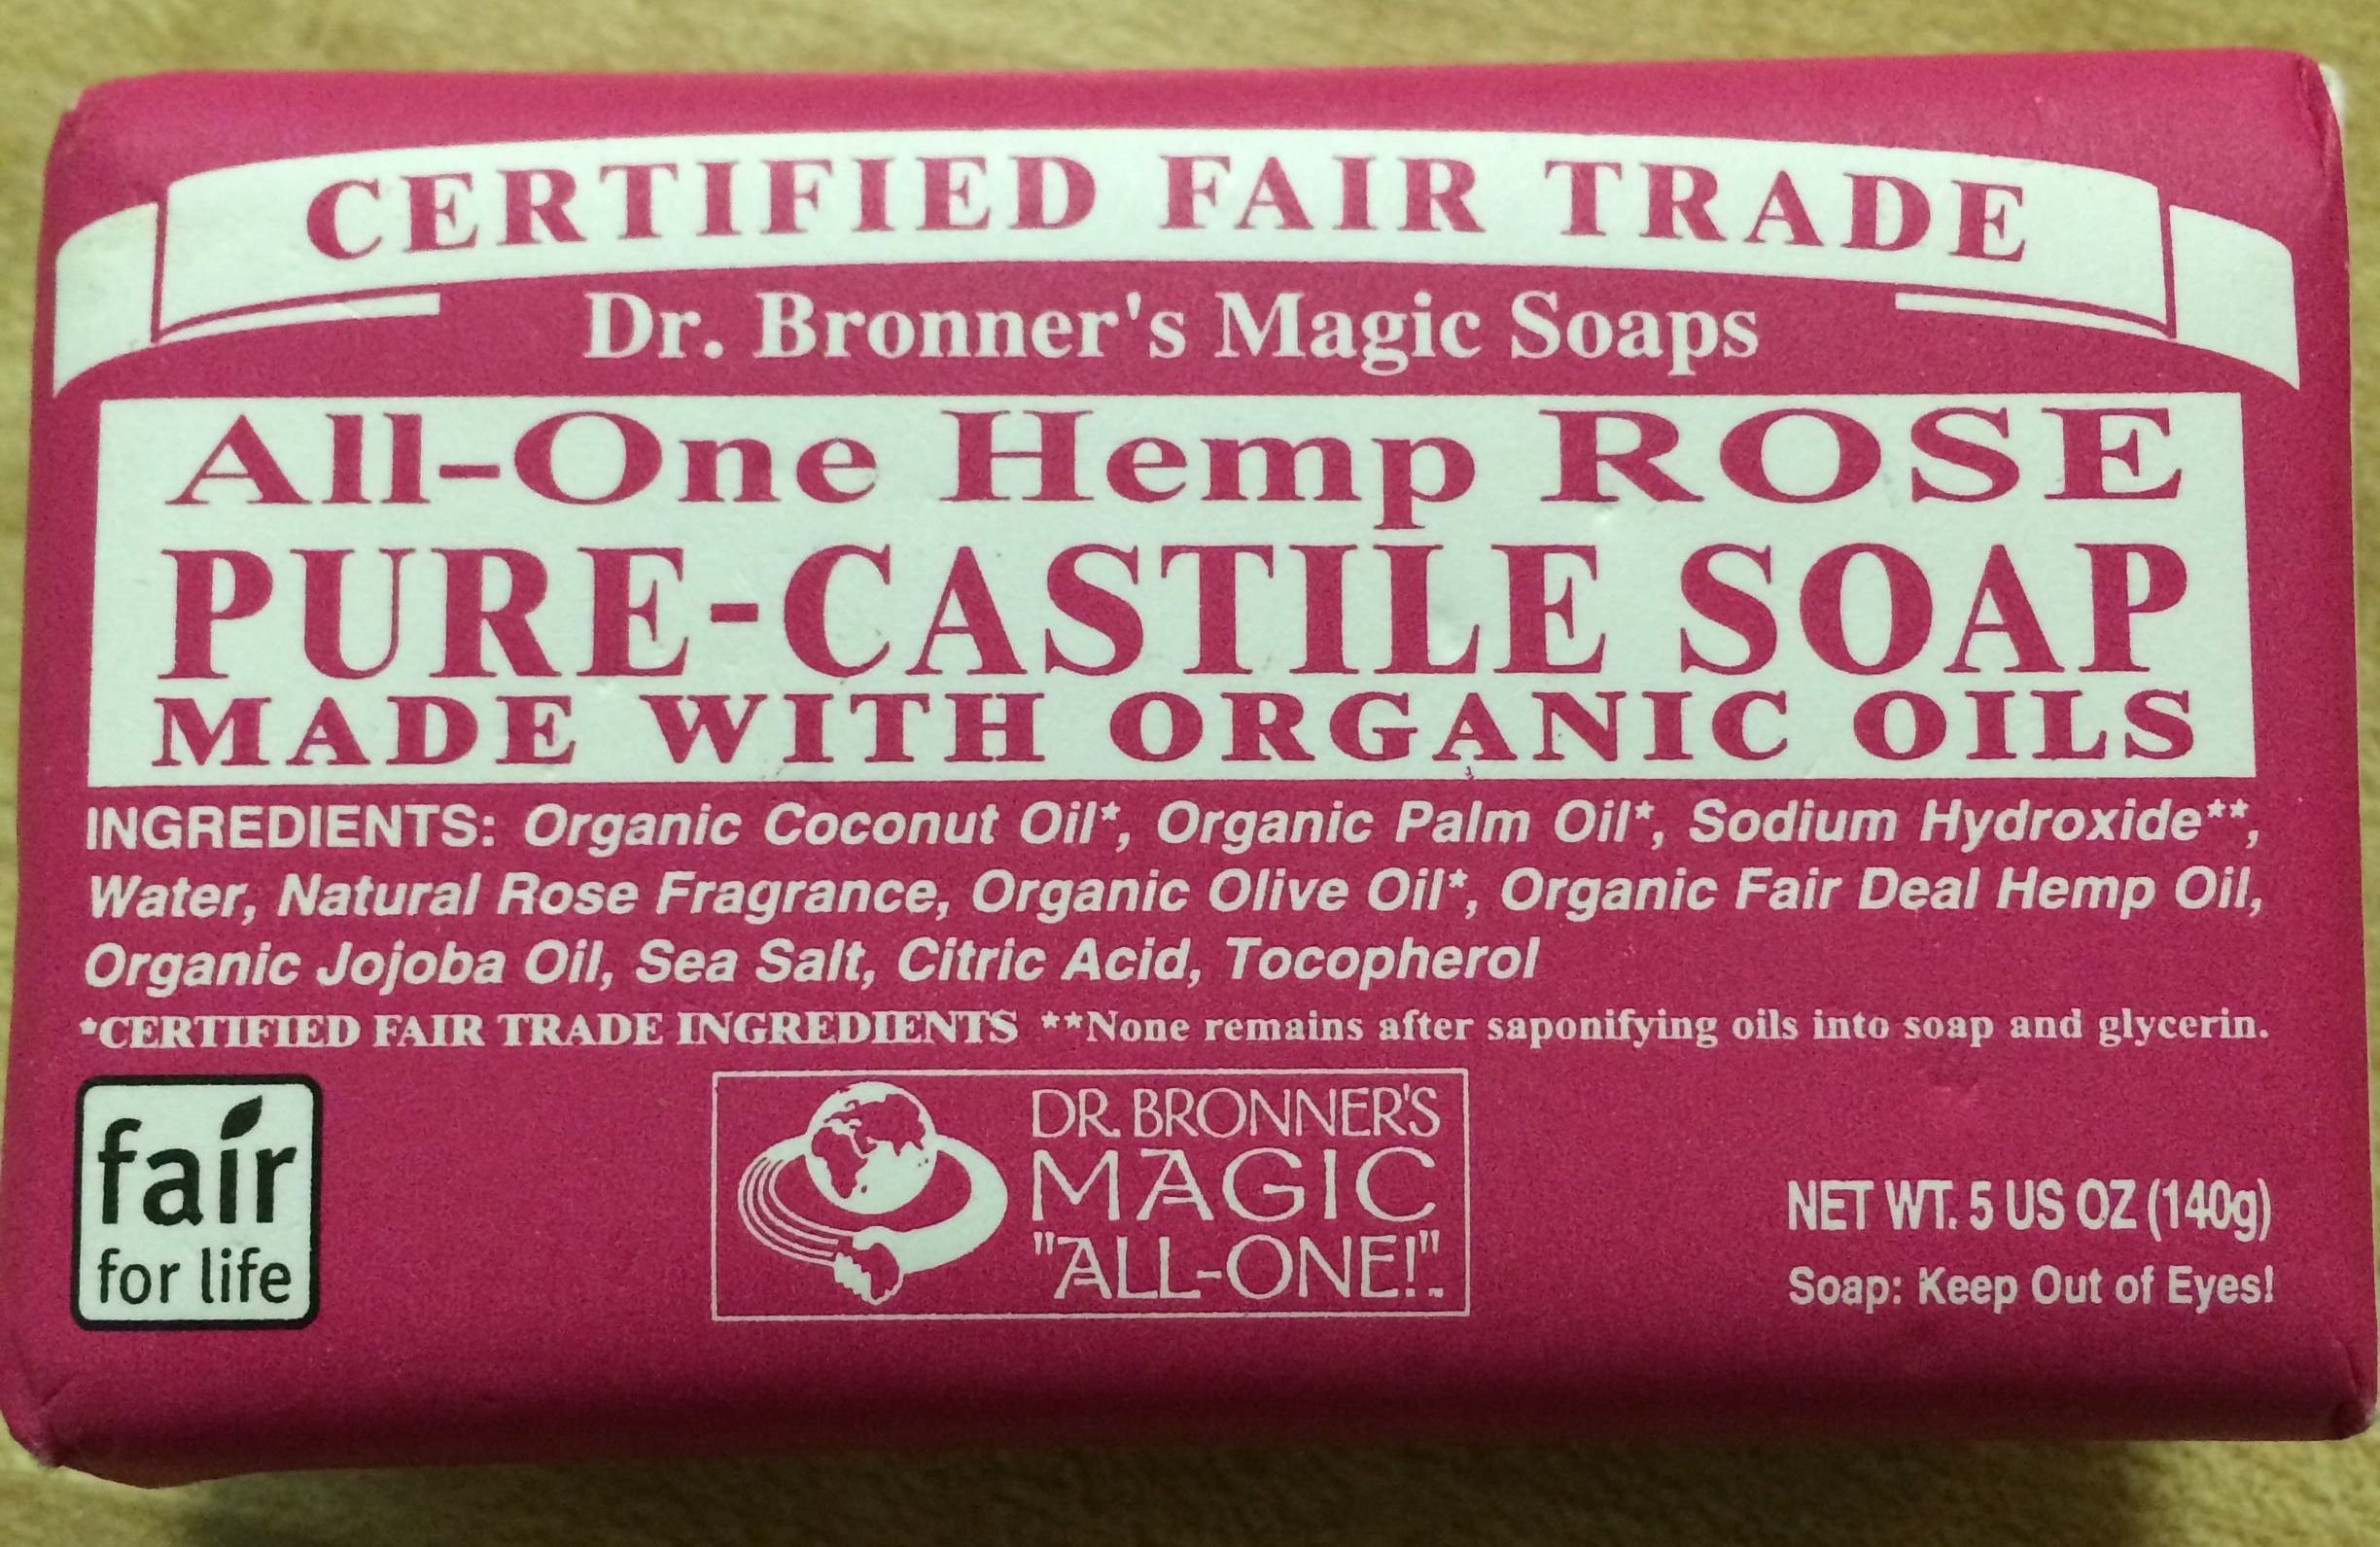 All-One Hemp Rose Pure Castile Soap made with organic oils - Dr. Bronner's Magic Soaps - 5 oz (140g)